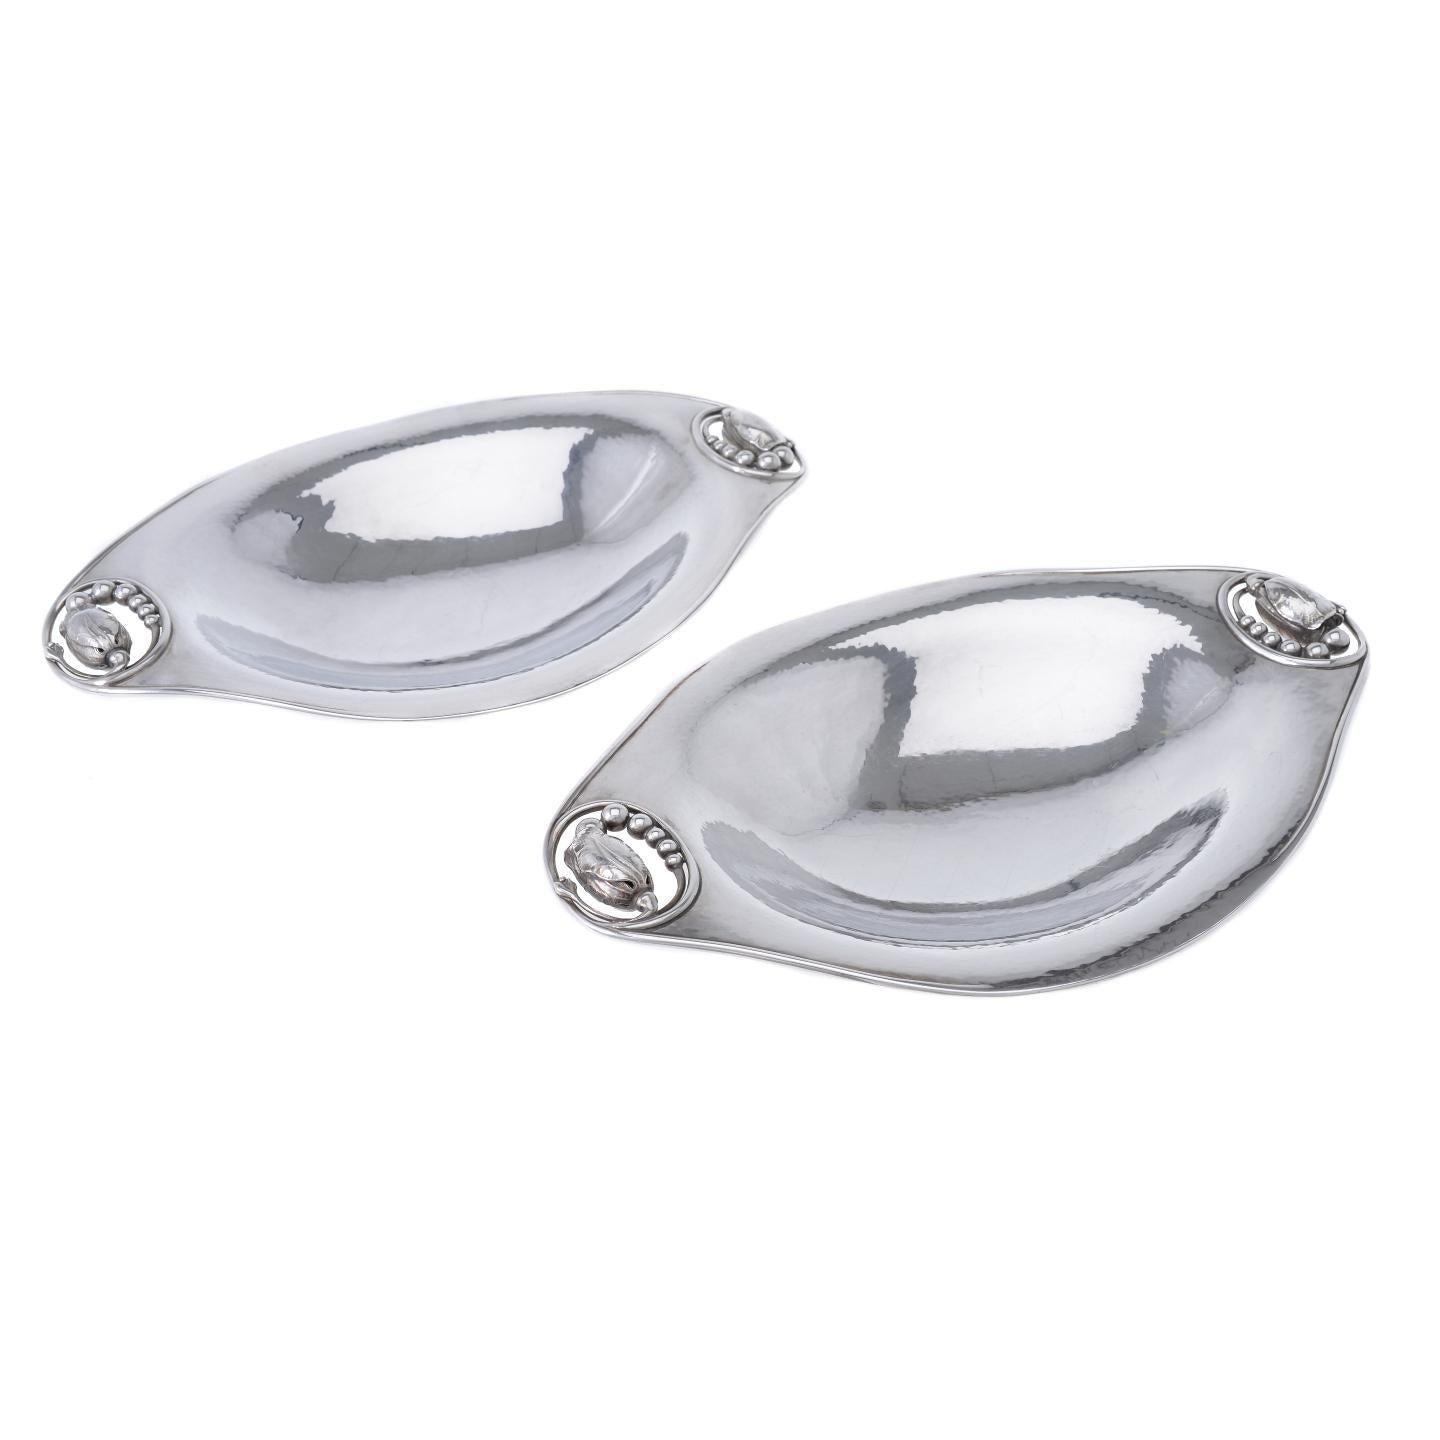 Pair of Georg Jensen Sterling Blossom or Magnolia Bread Trays 2A For Sale